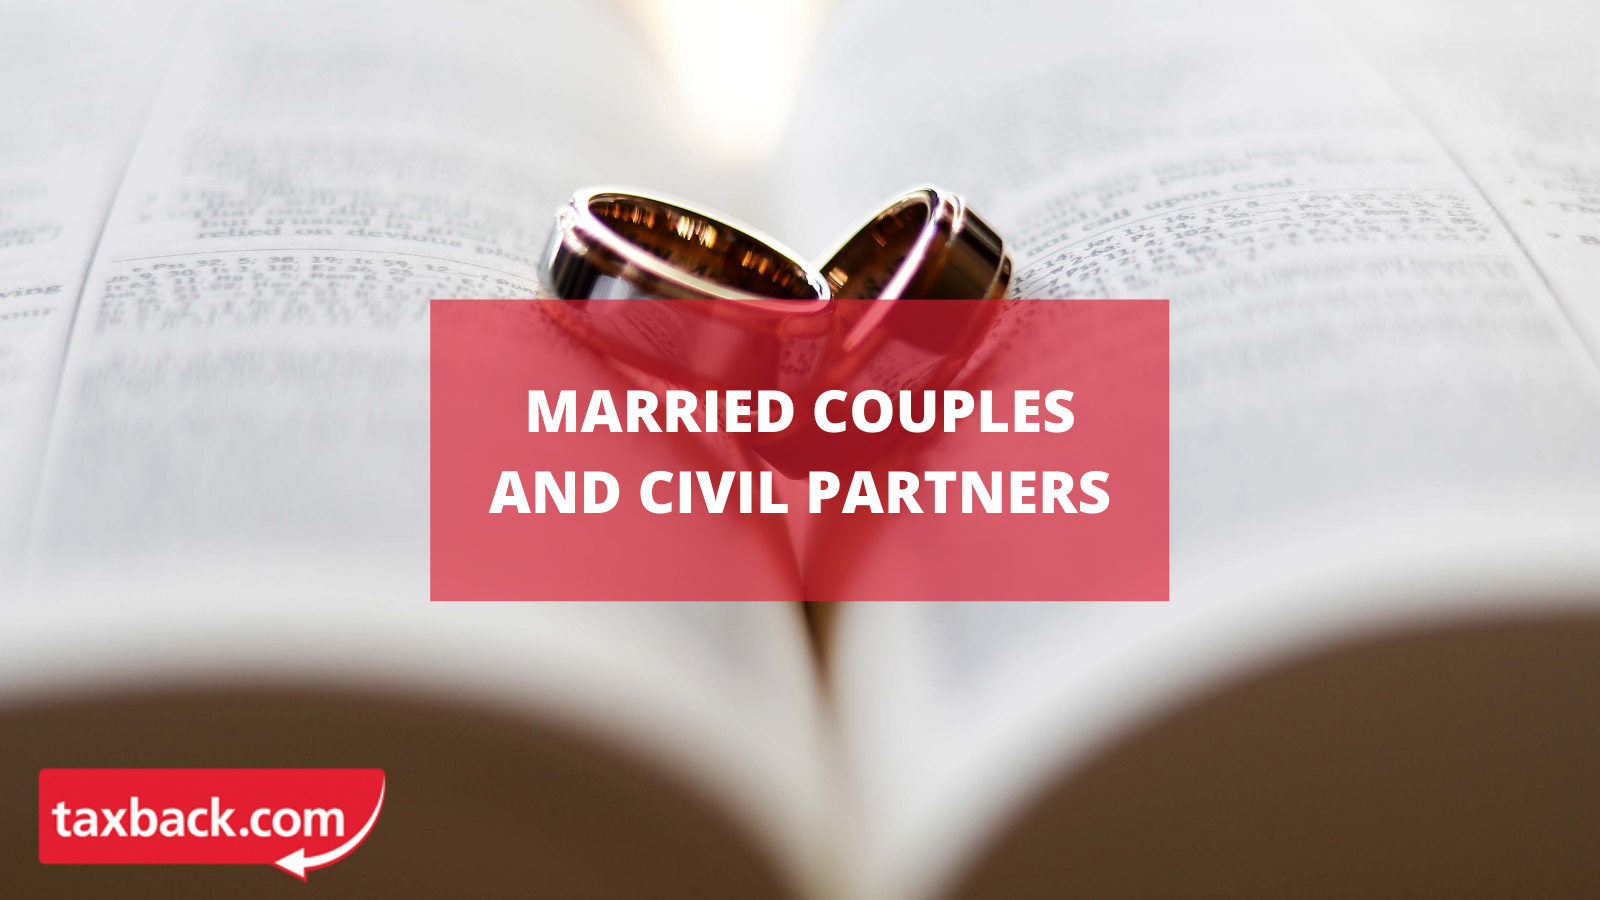 Taxation of married couples and civil partners